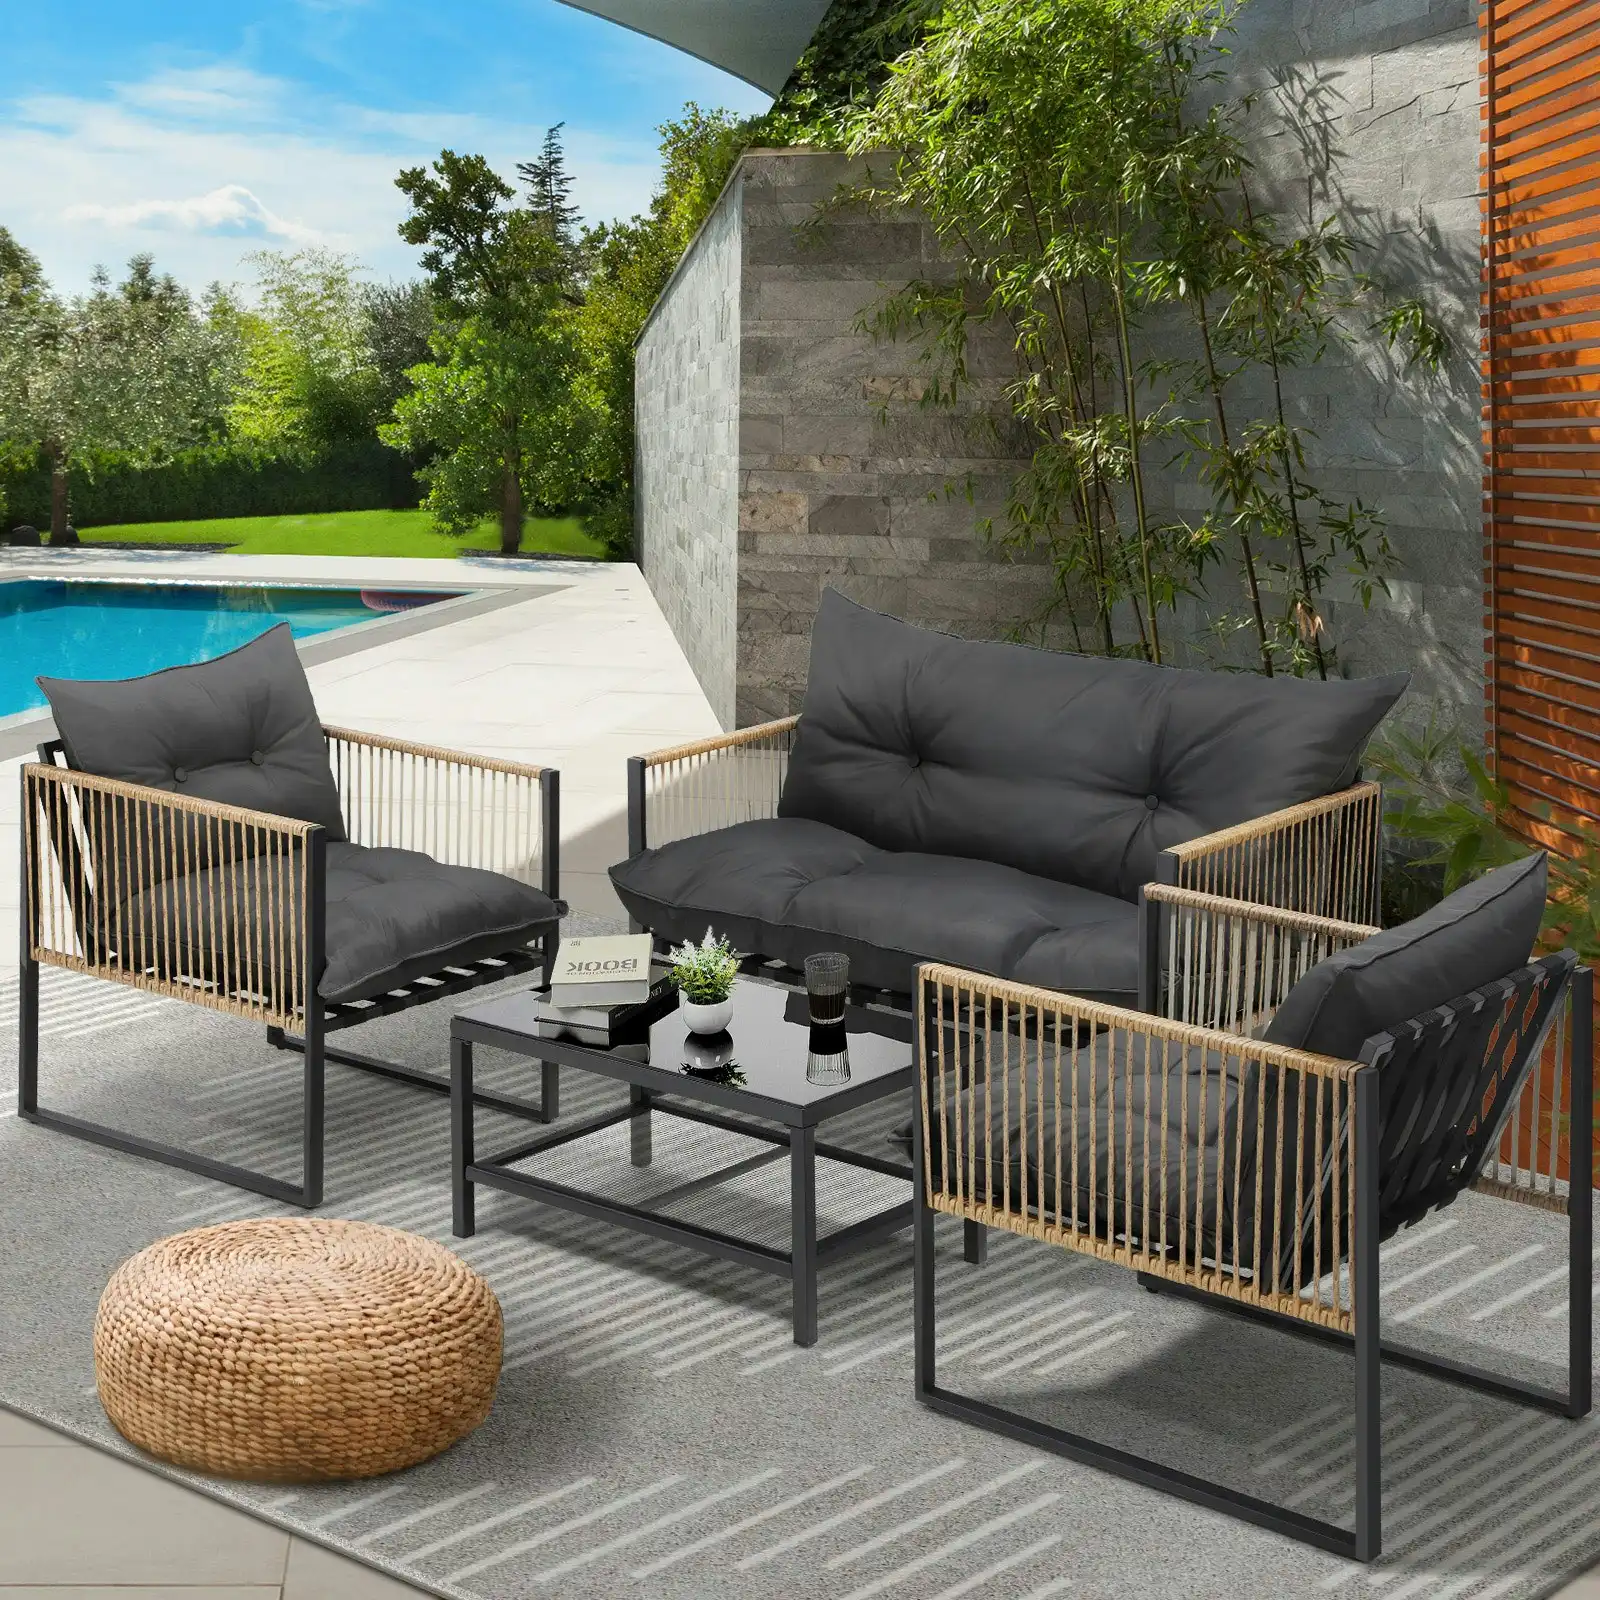 Livsip 4 Piece Outdoor Furniture Setting Garden Patio Lounge Sofa Table Chairs